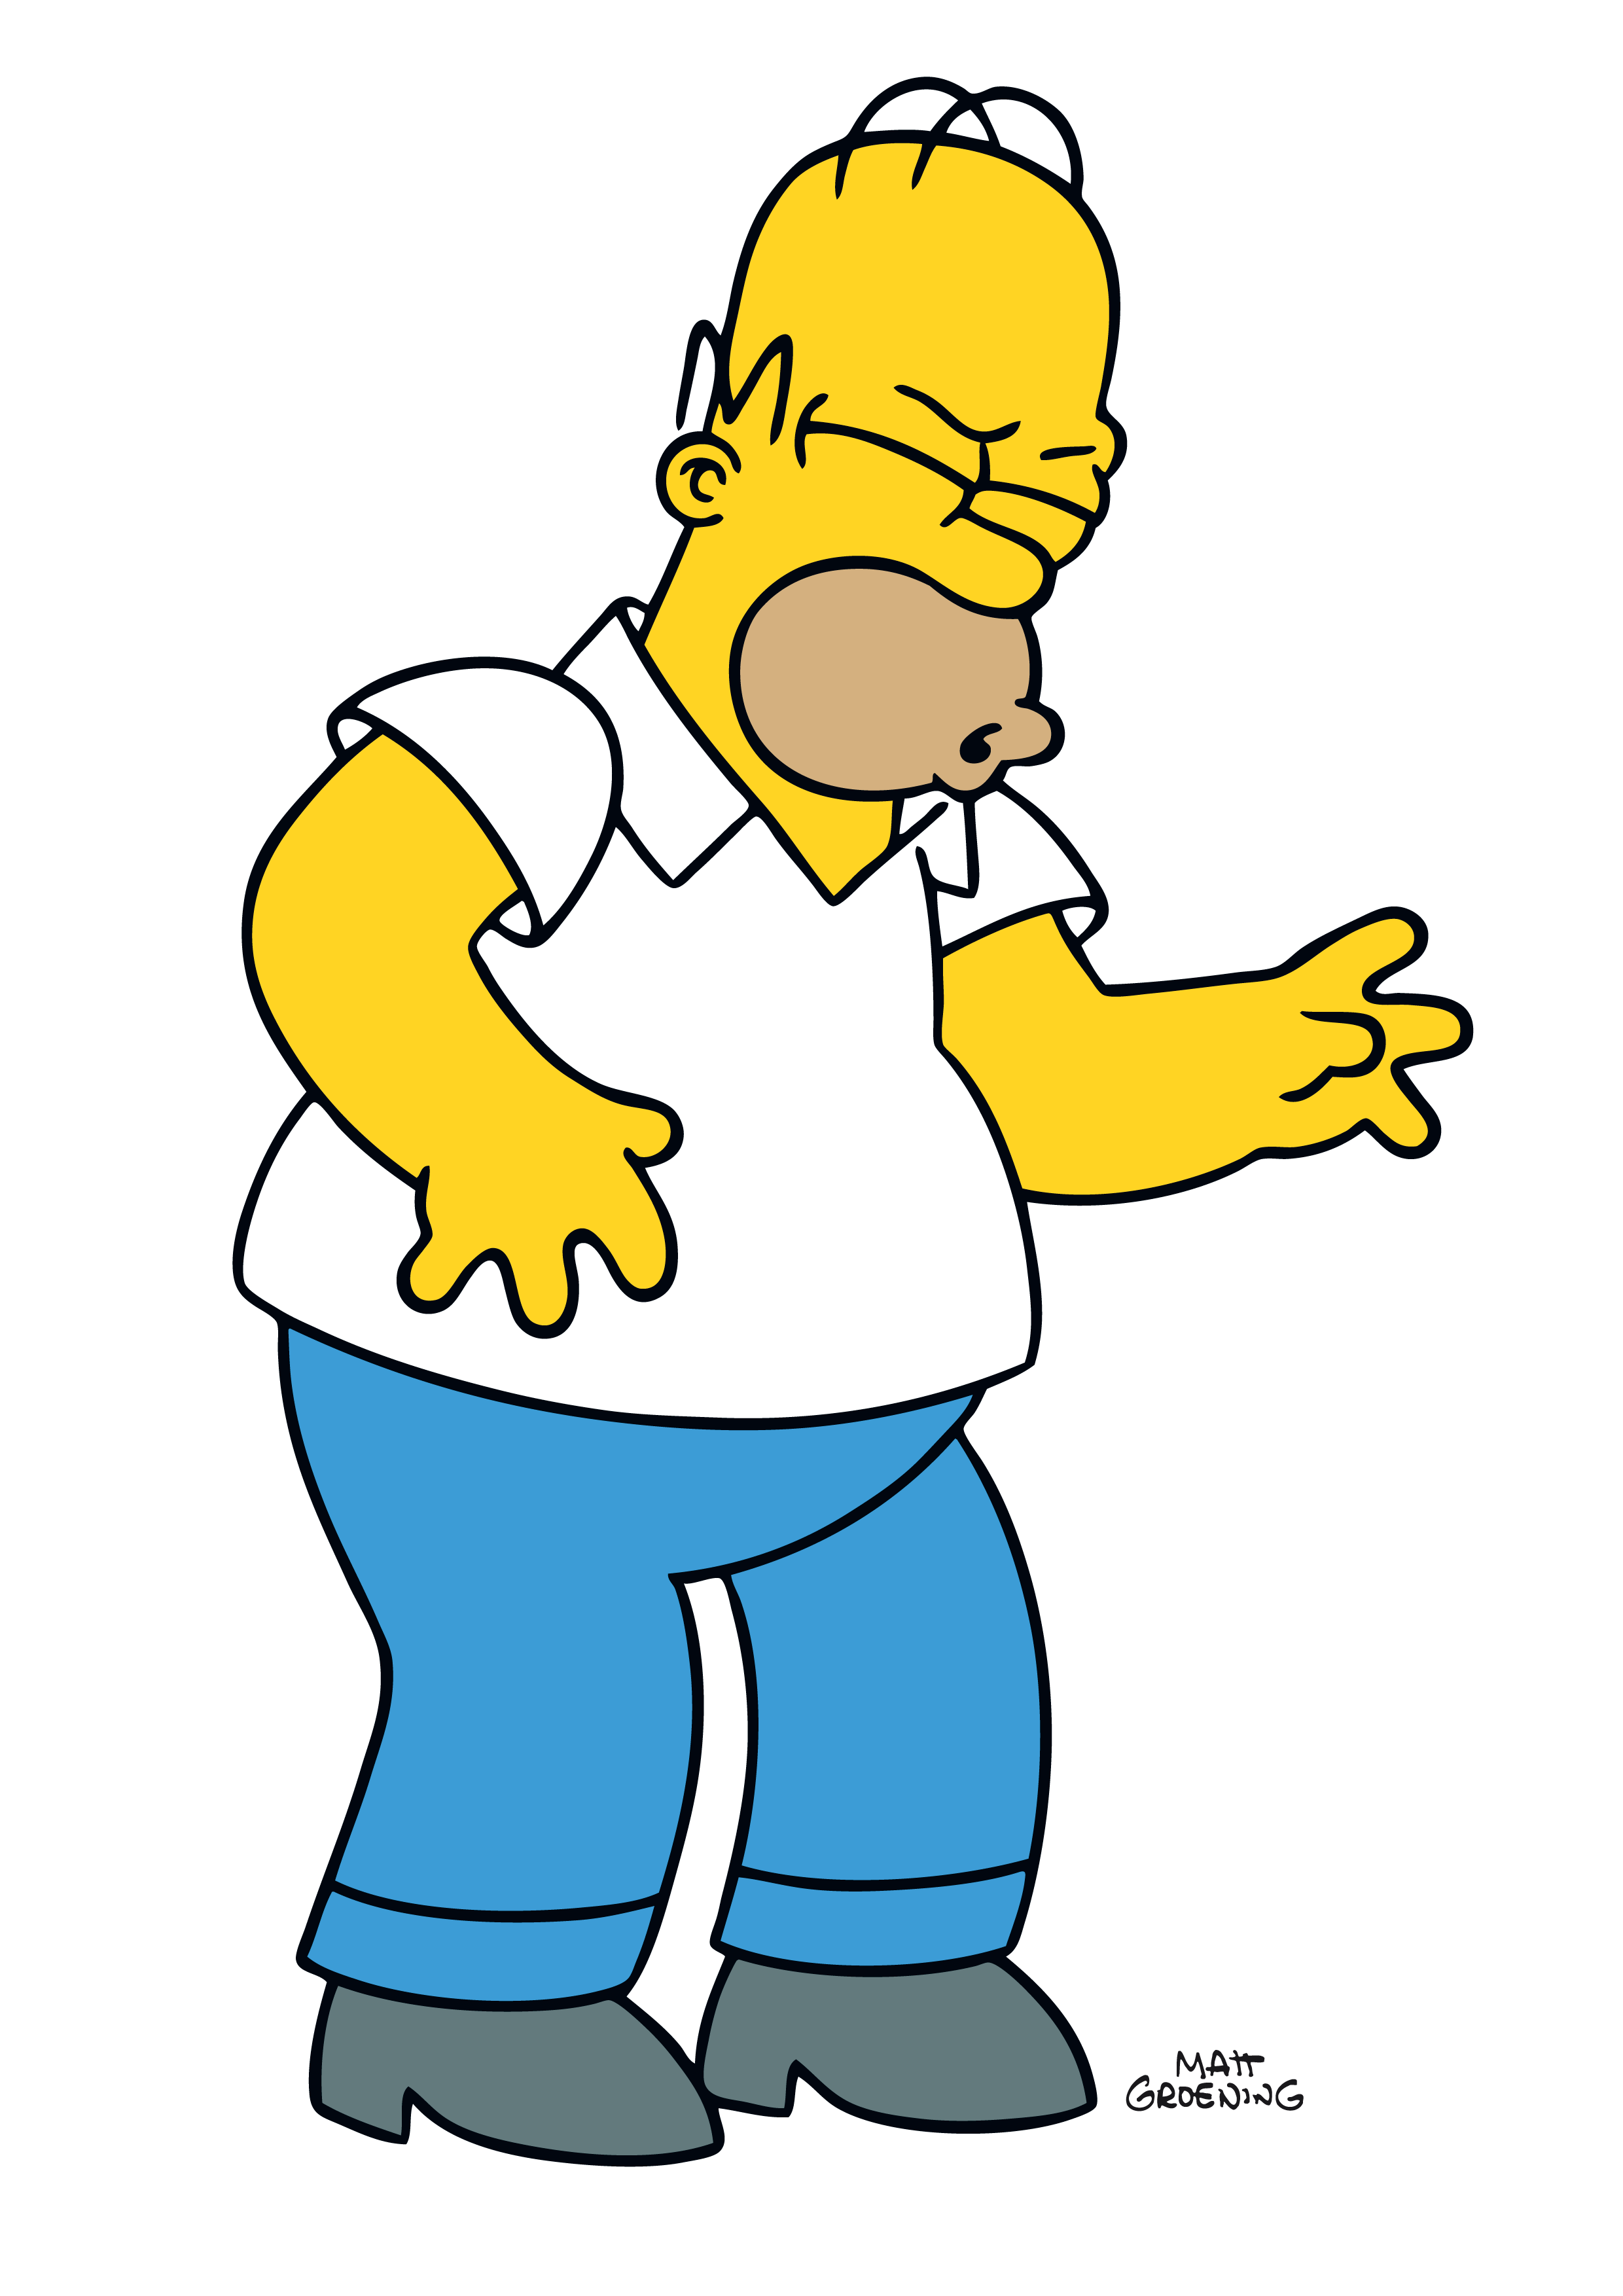 drivers license clipart homer simpson